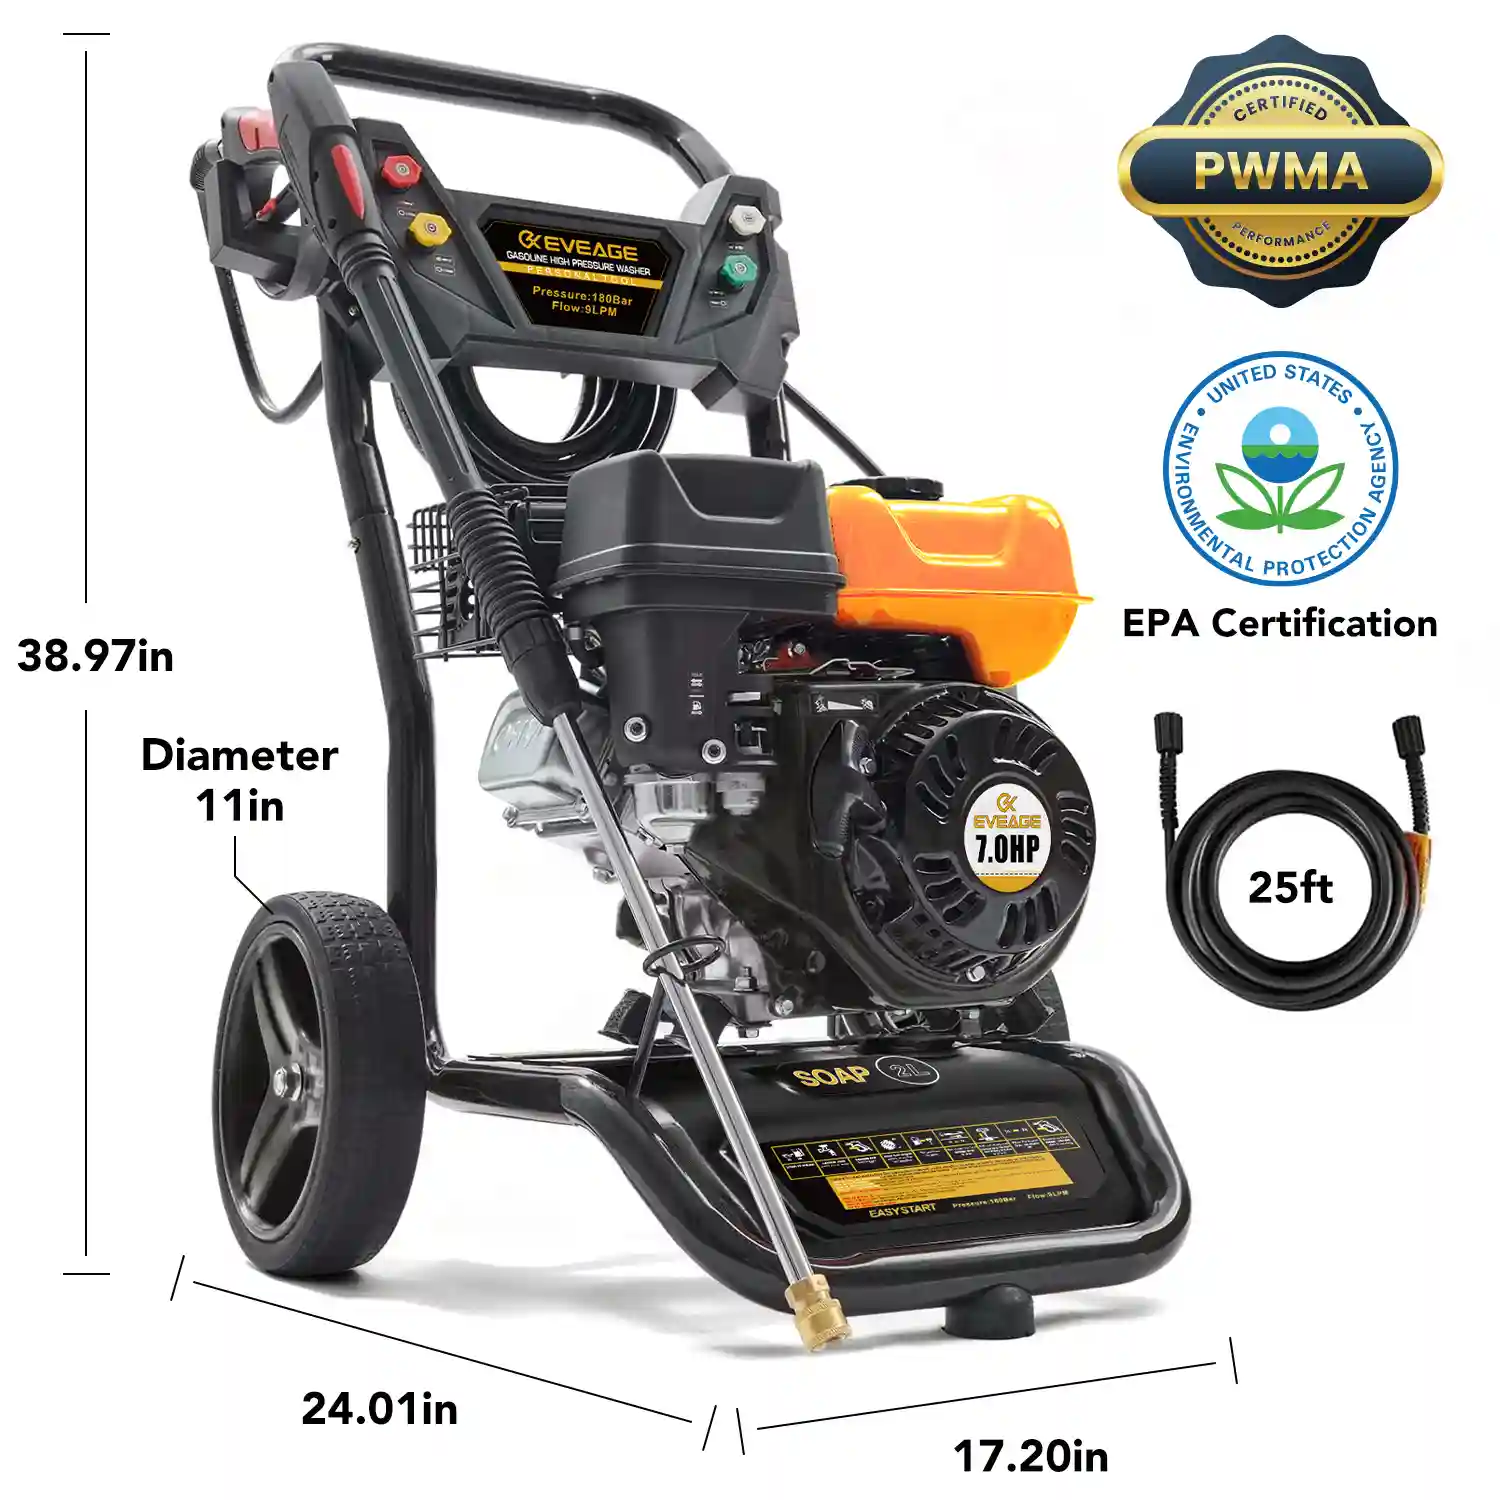 EVEAGE 3200PSI Gas Pressure Washer 6.5HP 2.4GPM with Hose, Wand, and Spray Nozzles